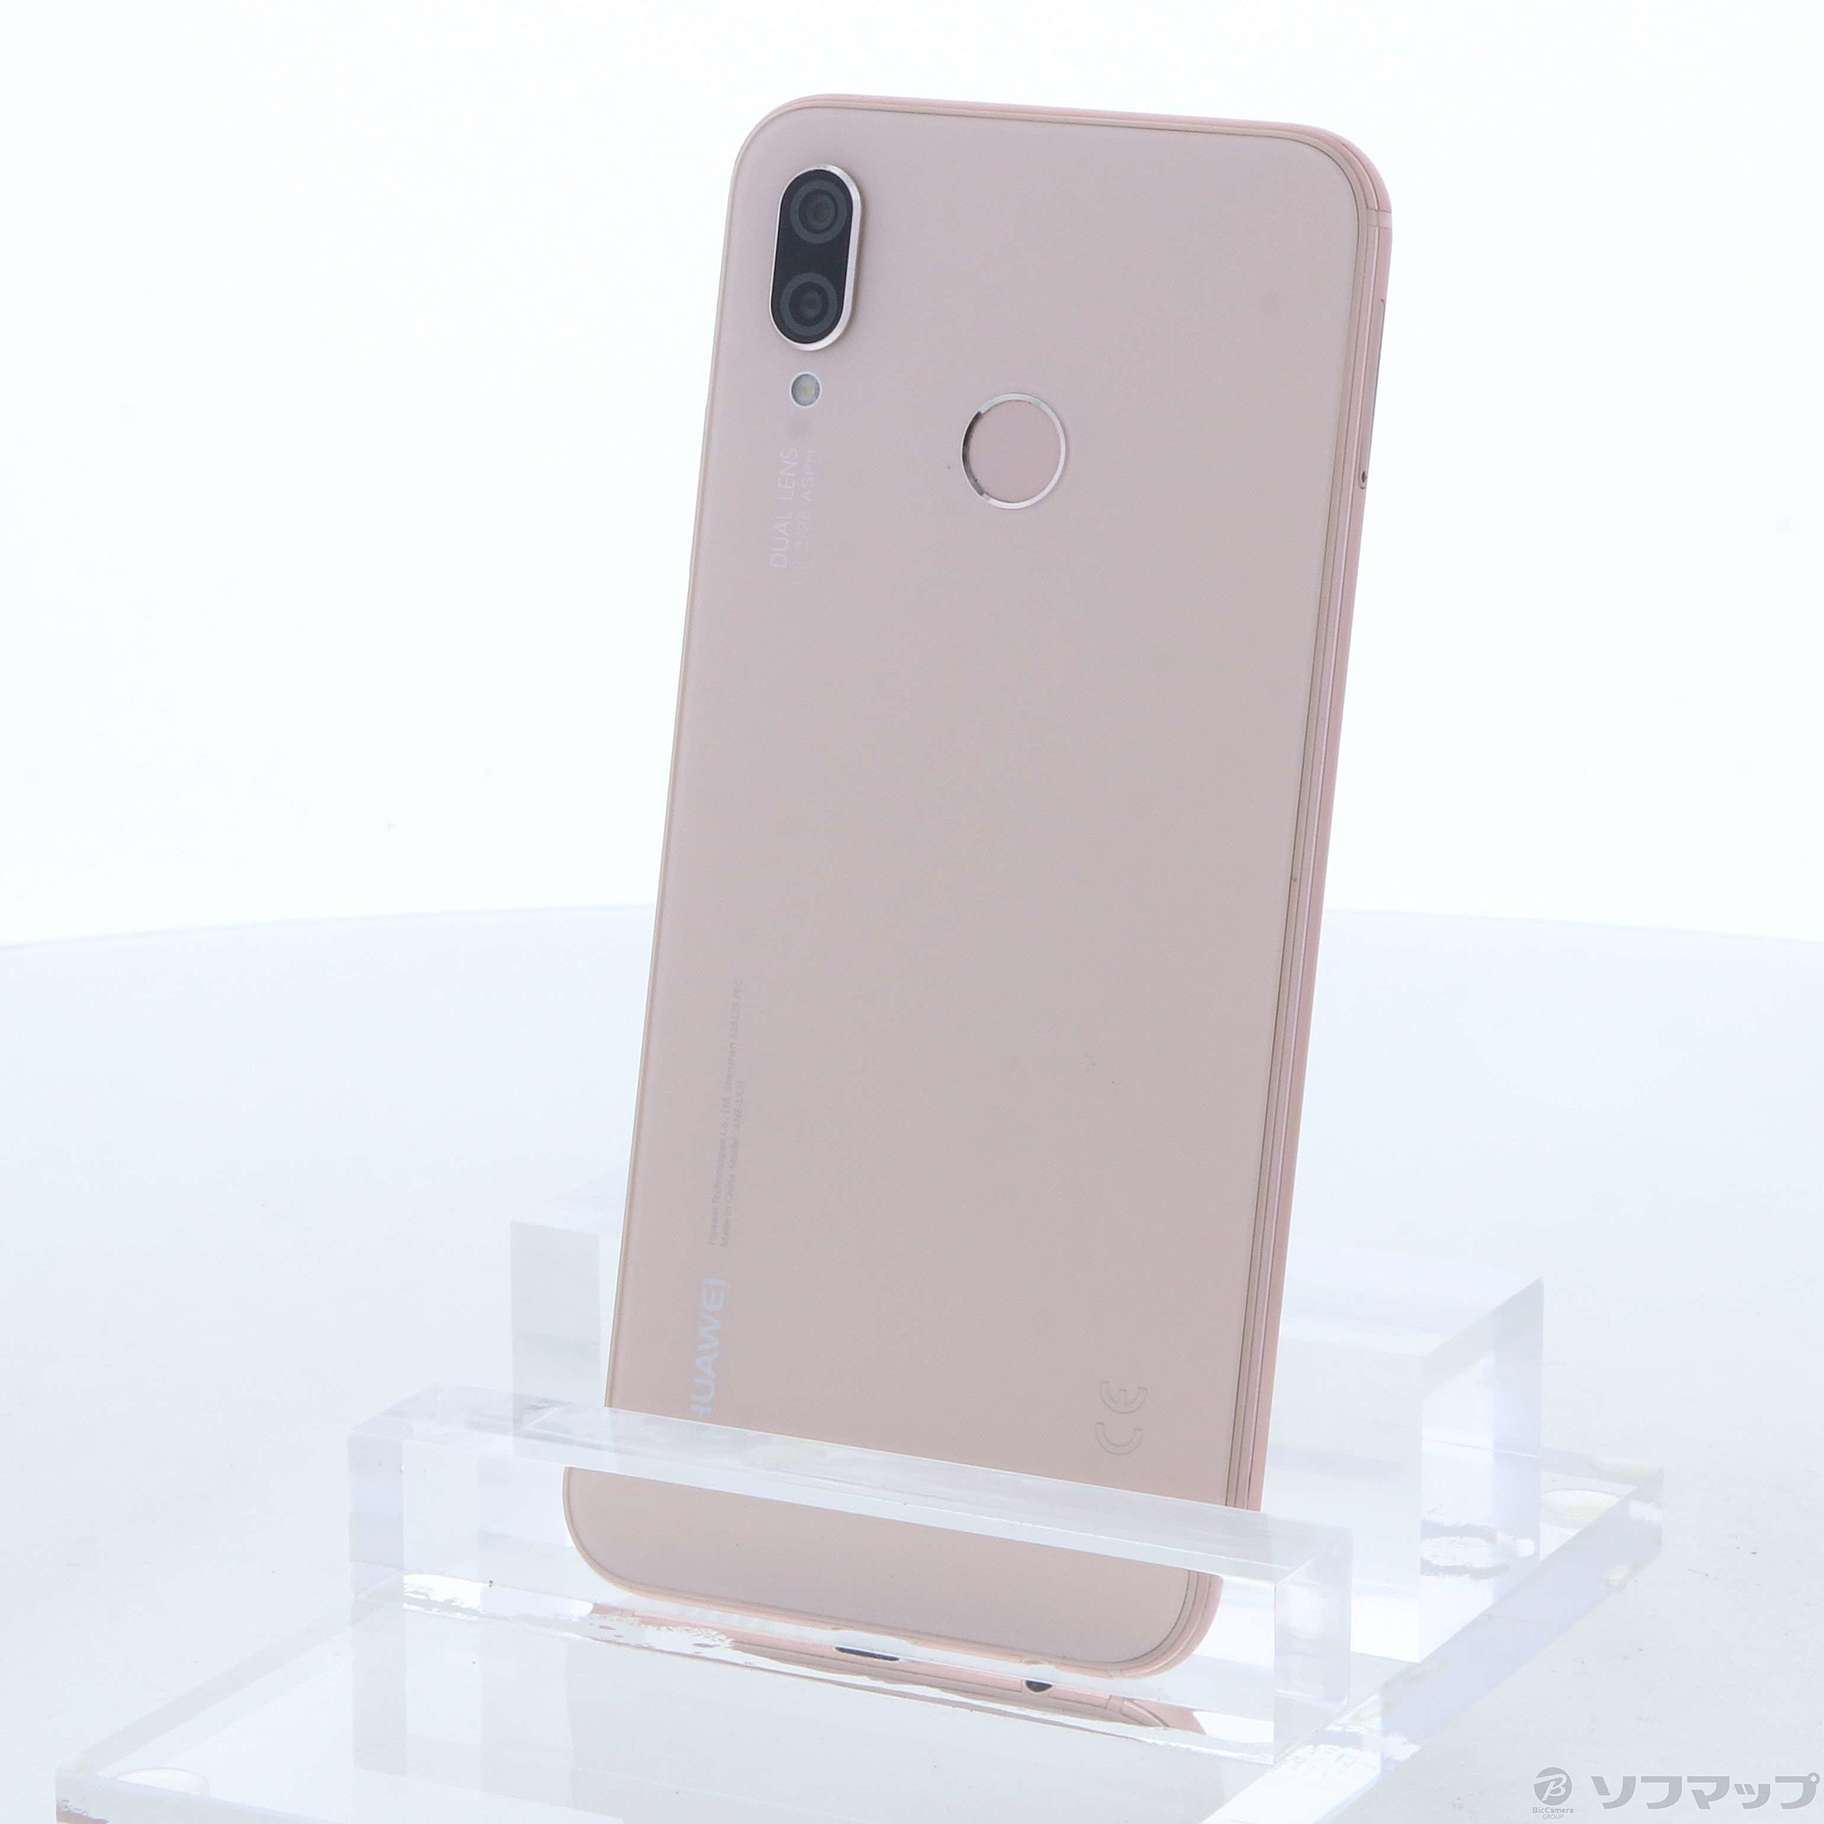 HUAWEI P20 lite  新品サクラピンク